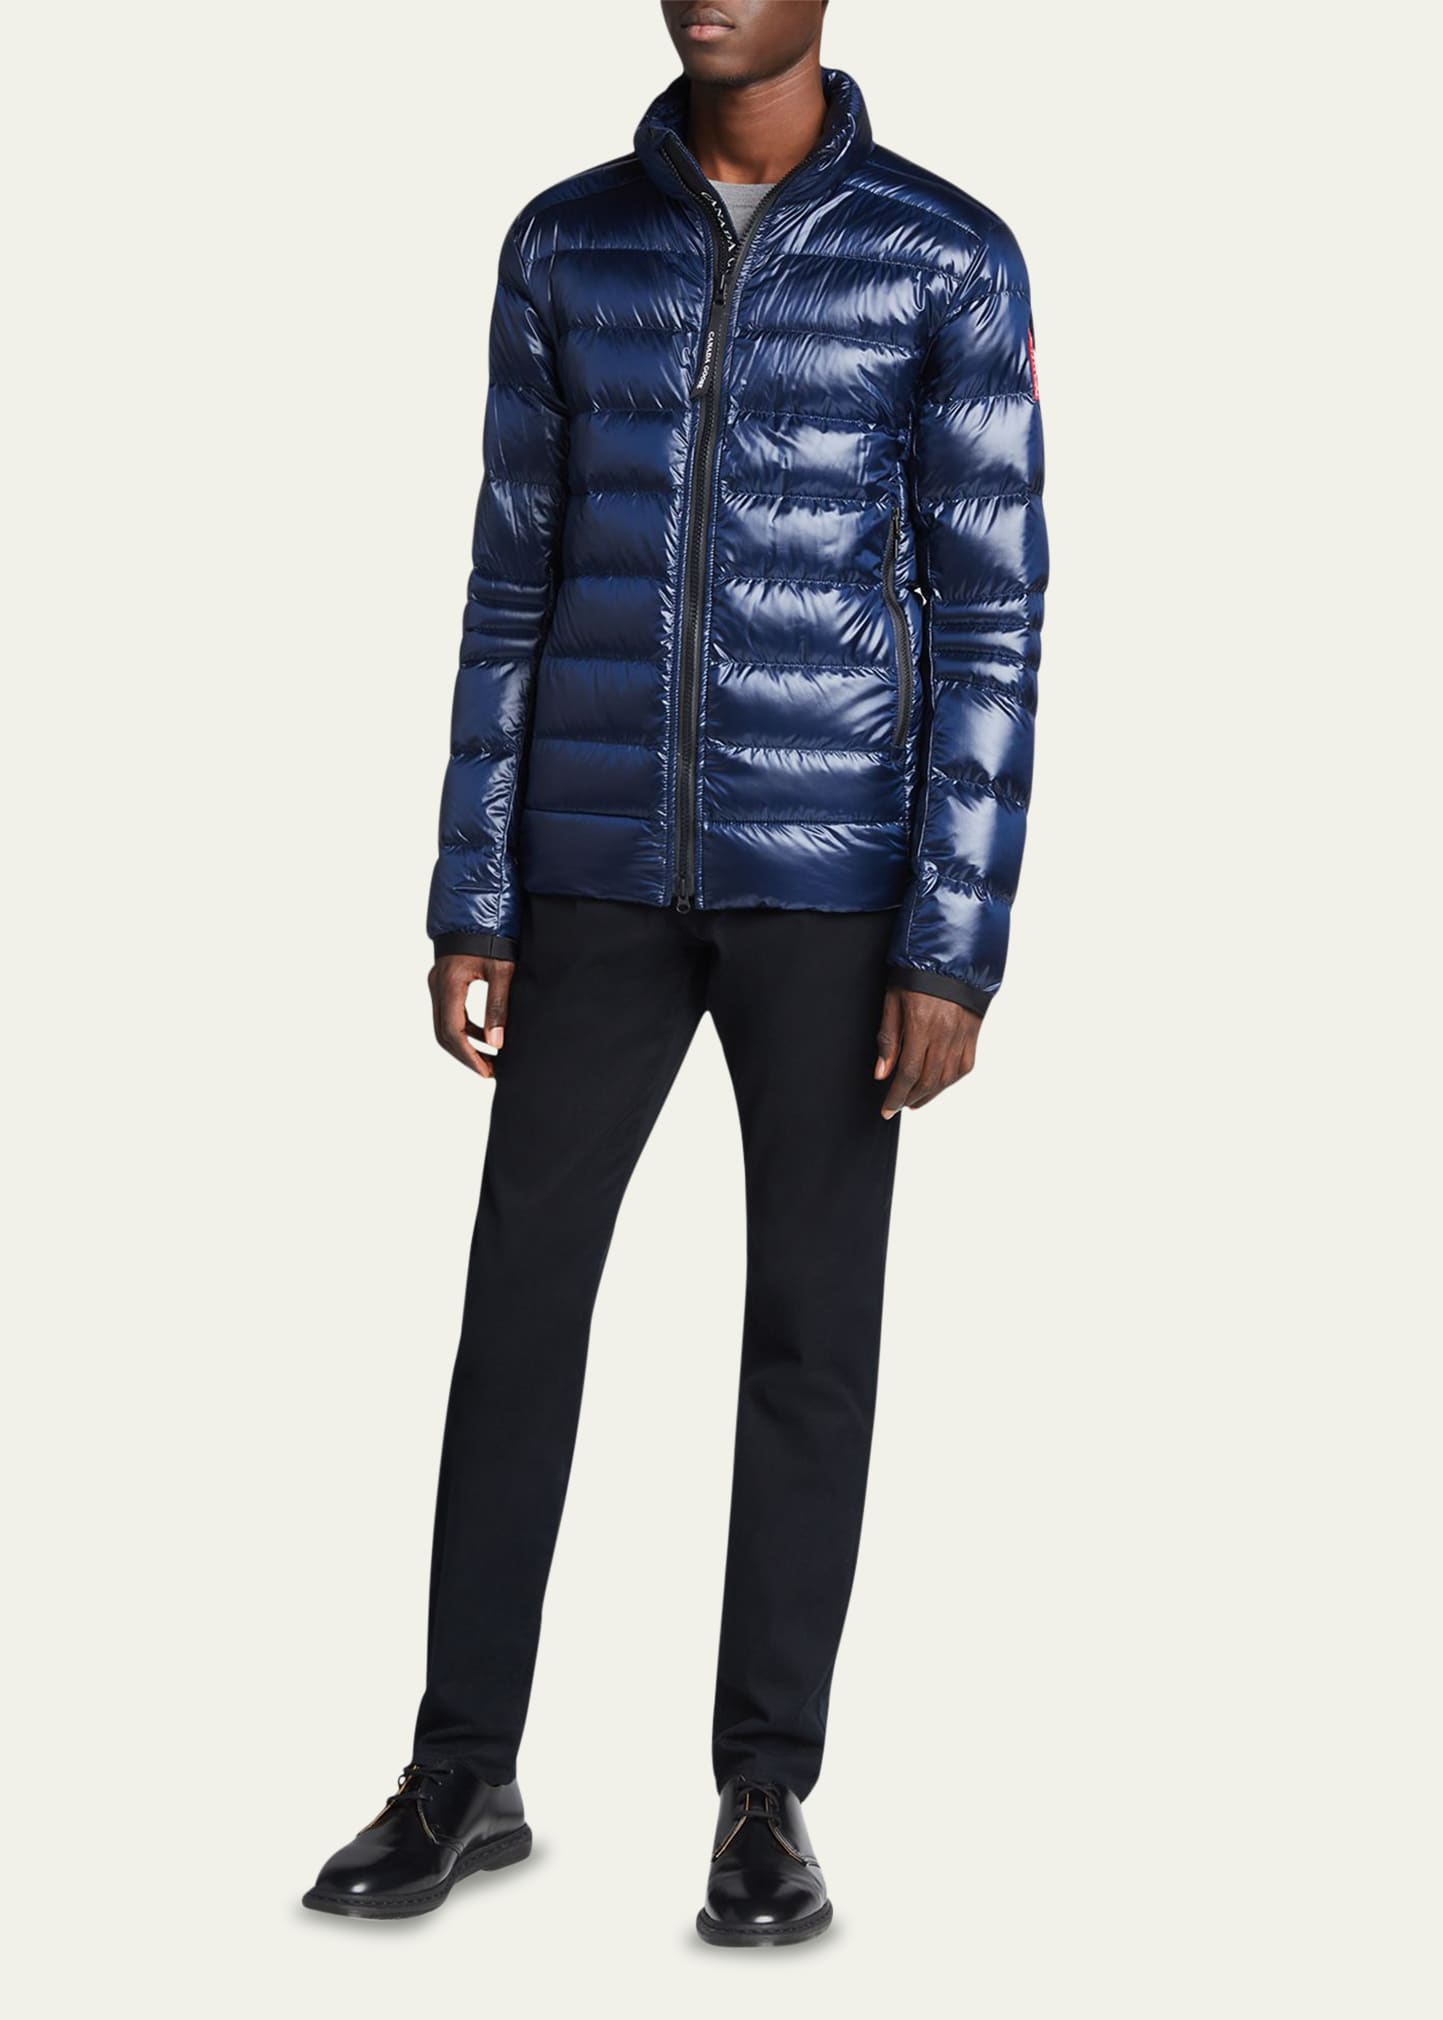 Canada Goose Men's Crofton Lightweight Quilted Packable Jacket